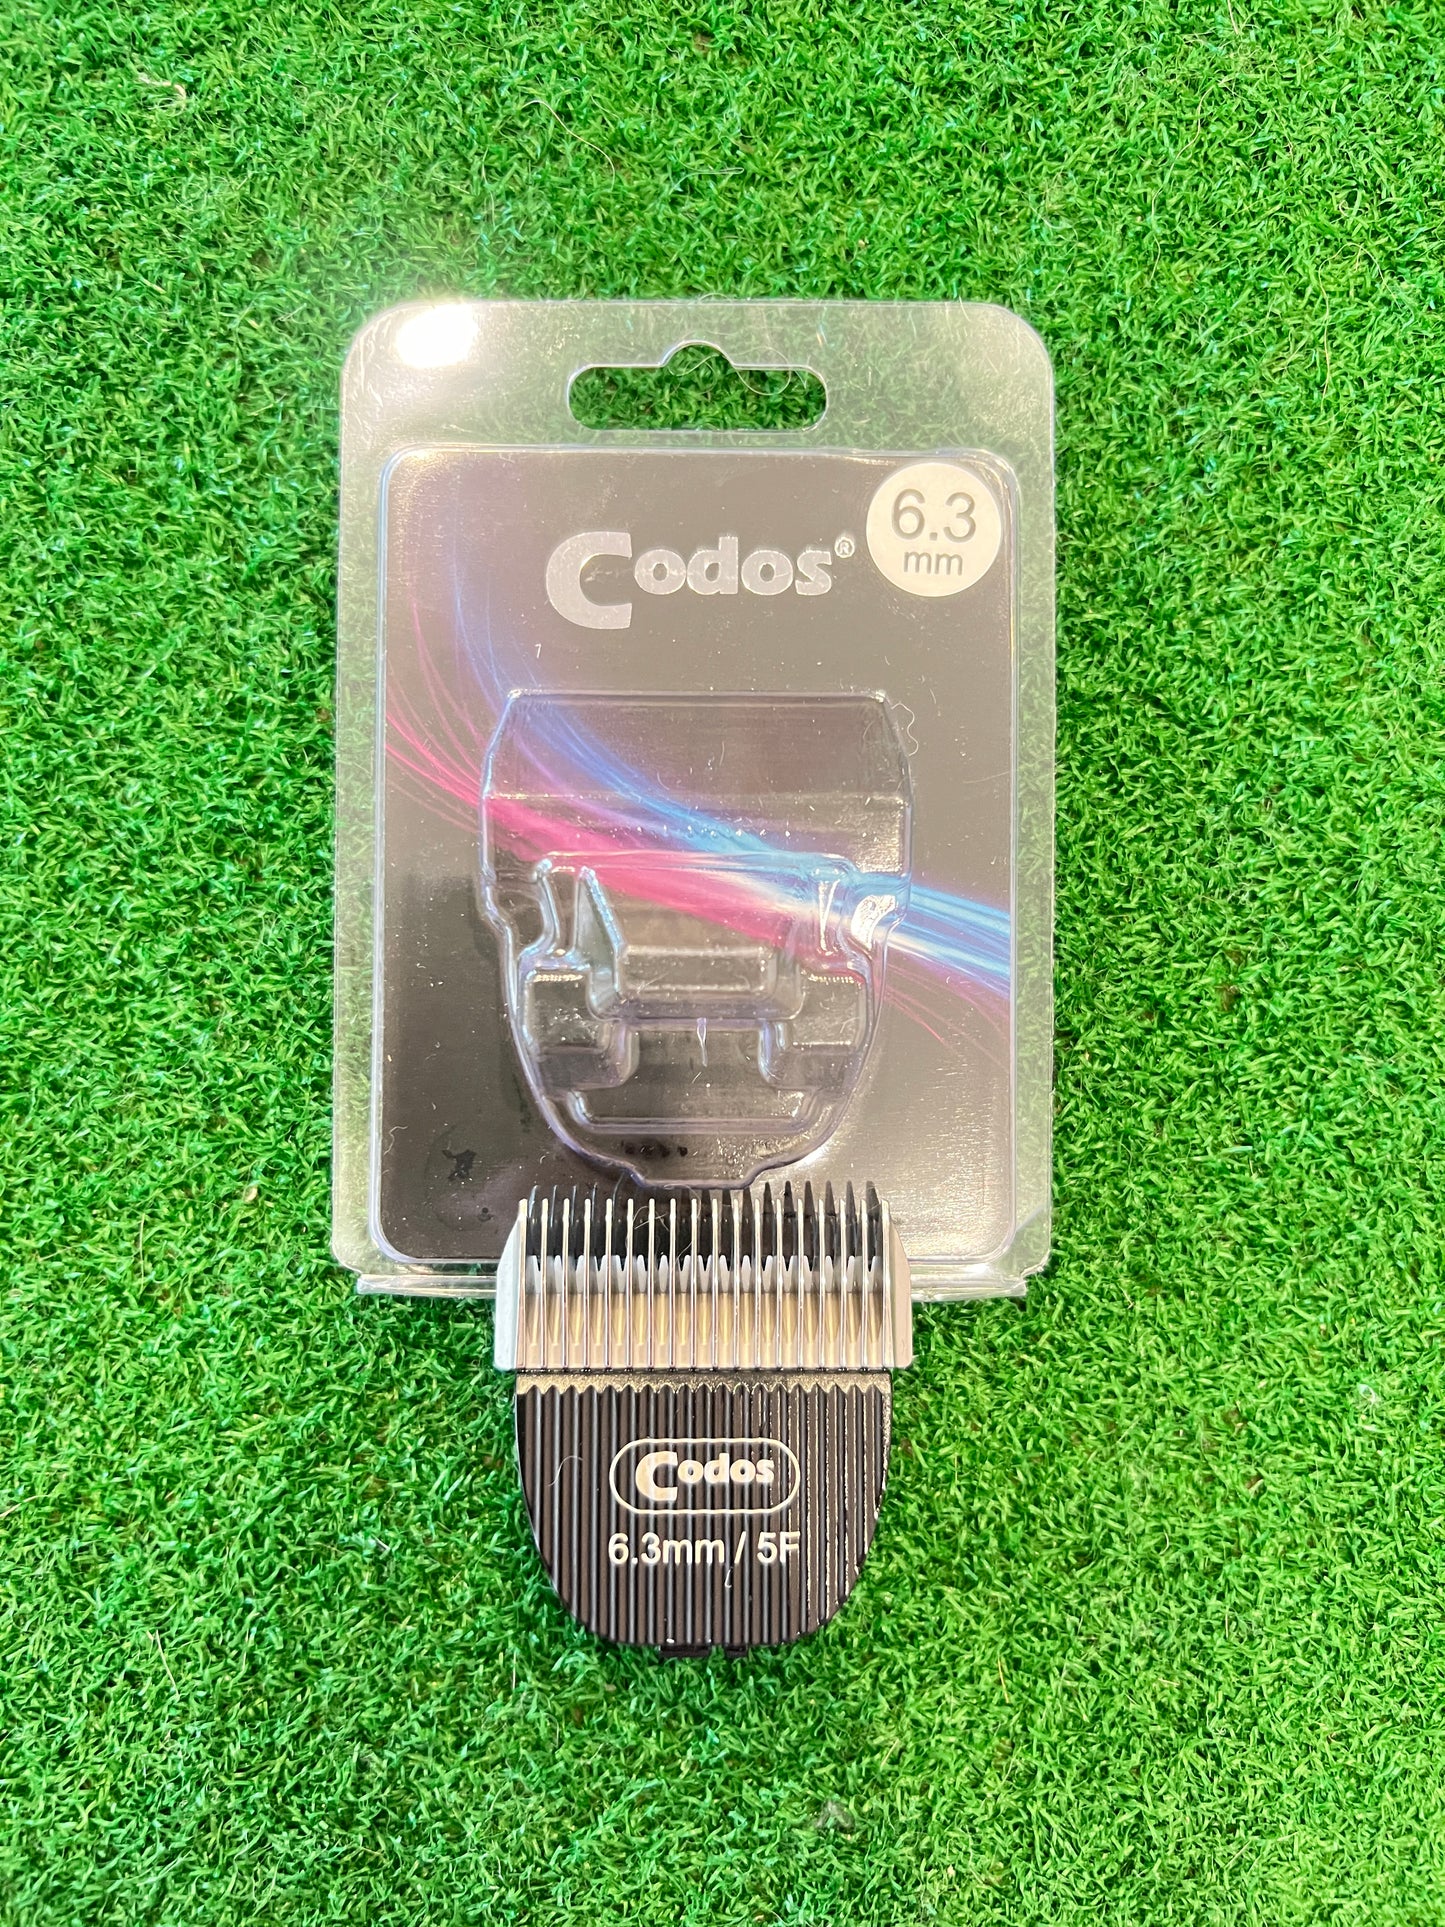 Codos Professional Hair Clipper Replacement Head Blade Shaver #5f (6.3mm)